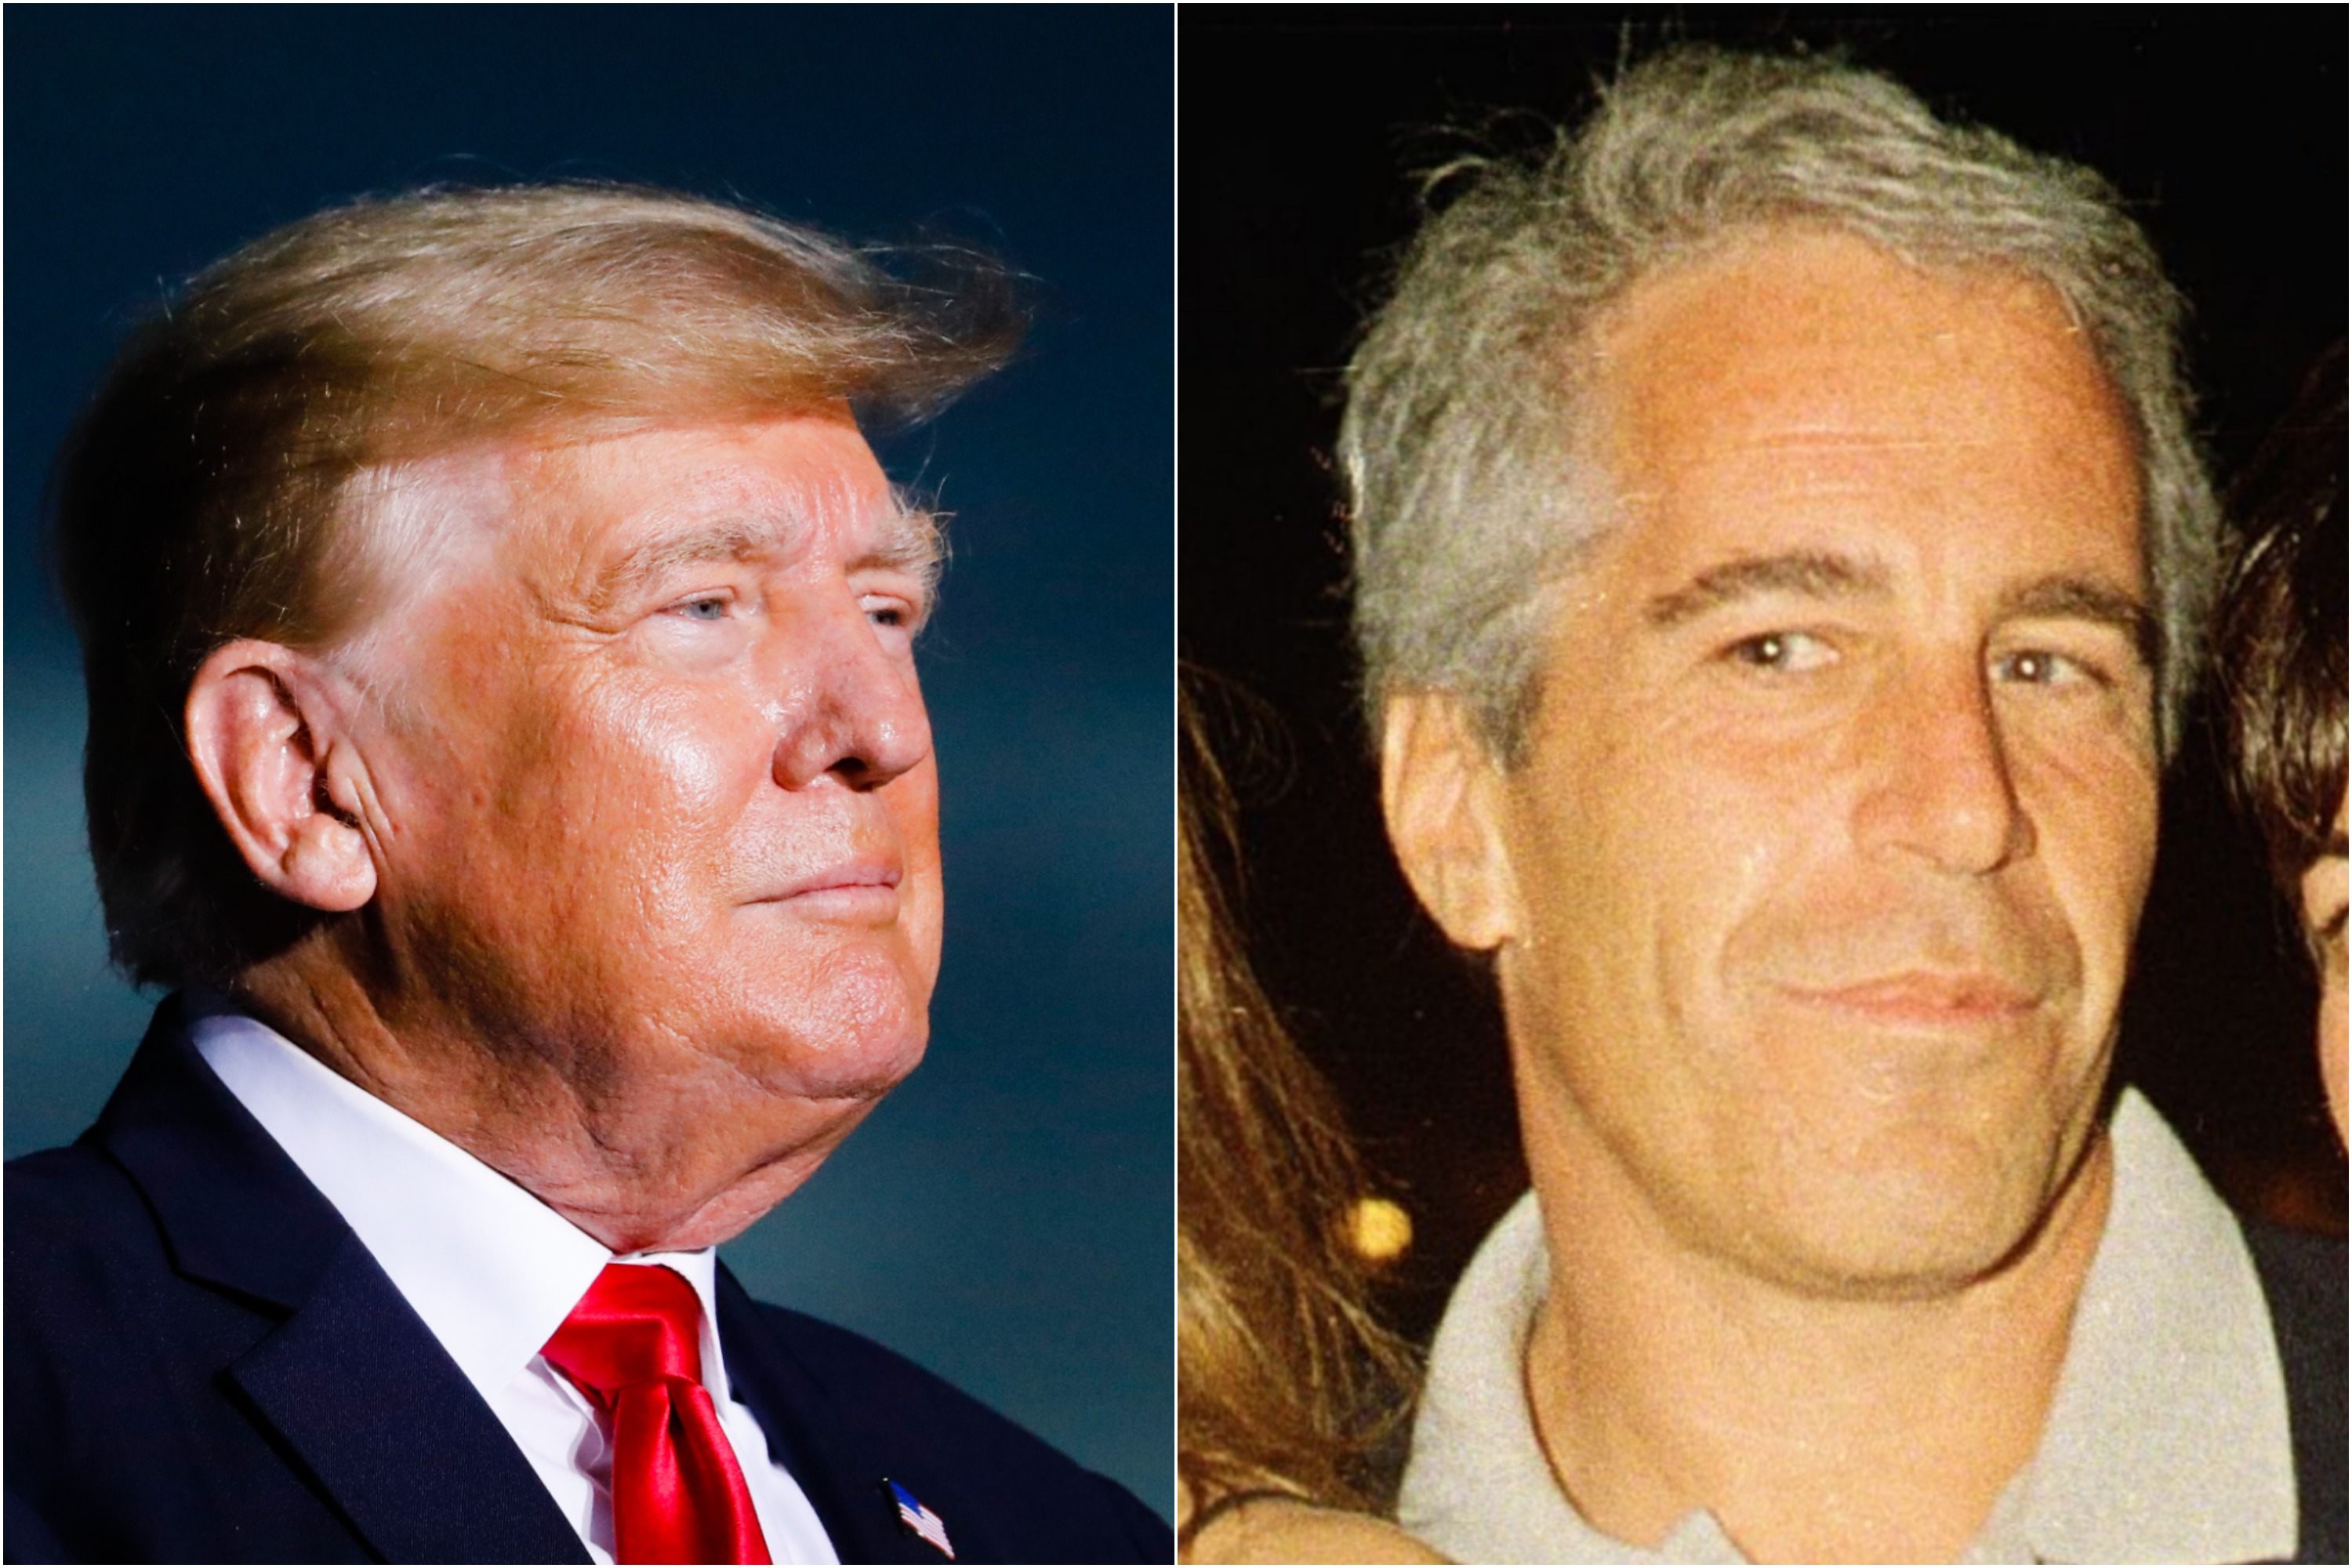 Fact Check Do Papers Allege Trump And Epstein Took Part In Sexual Assault